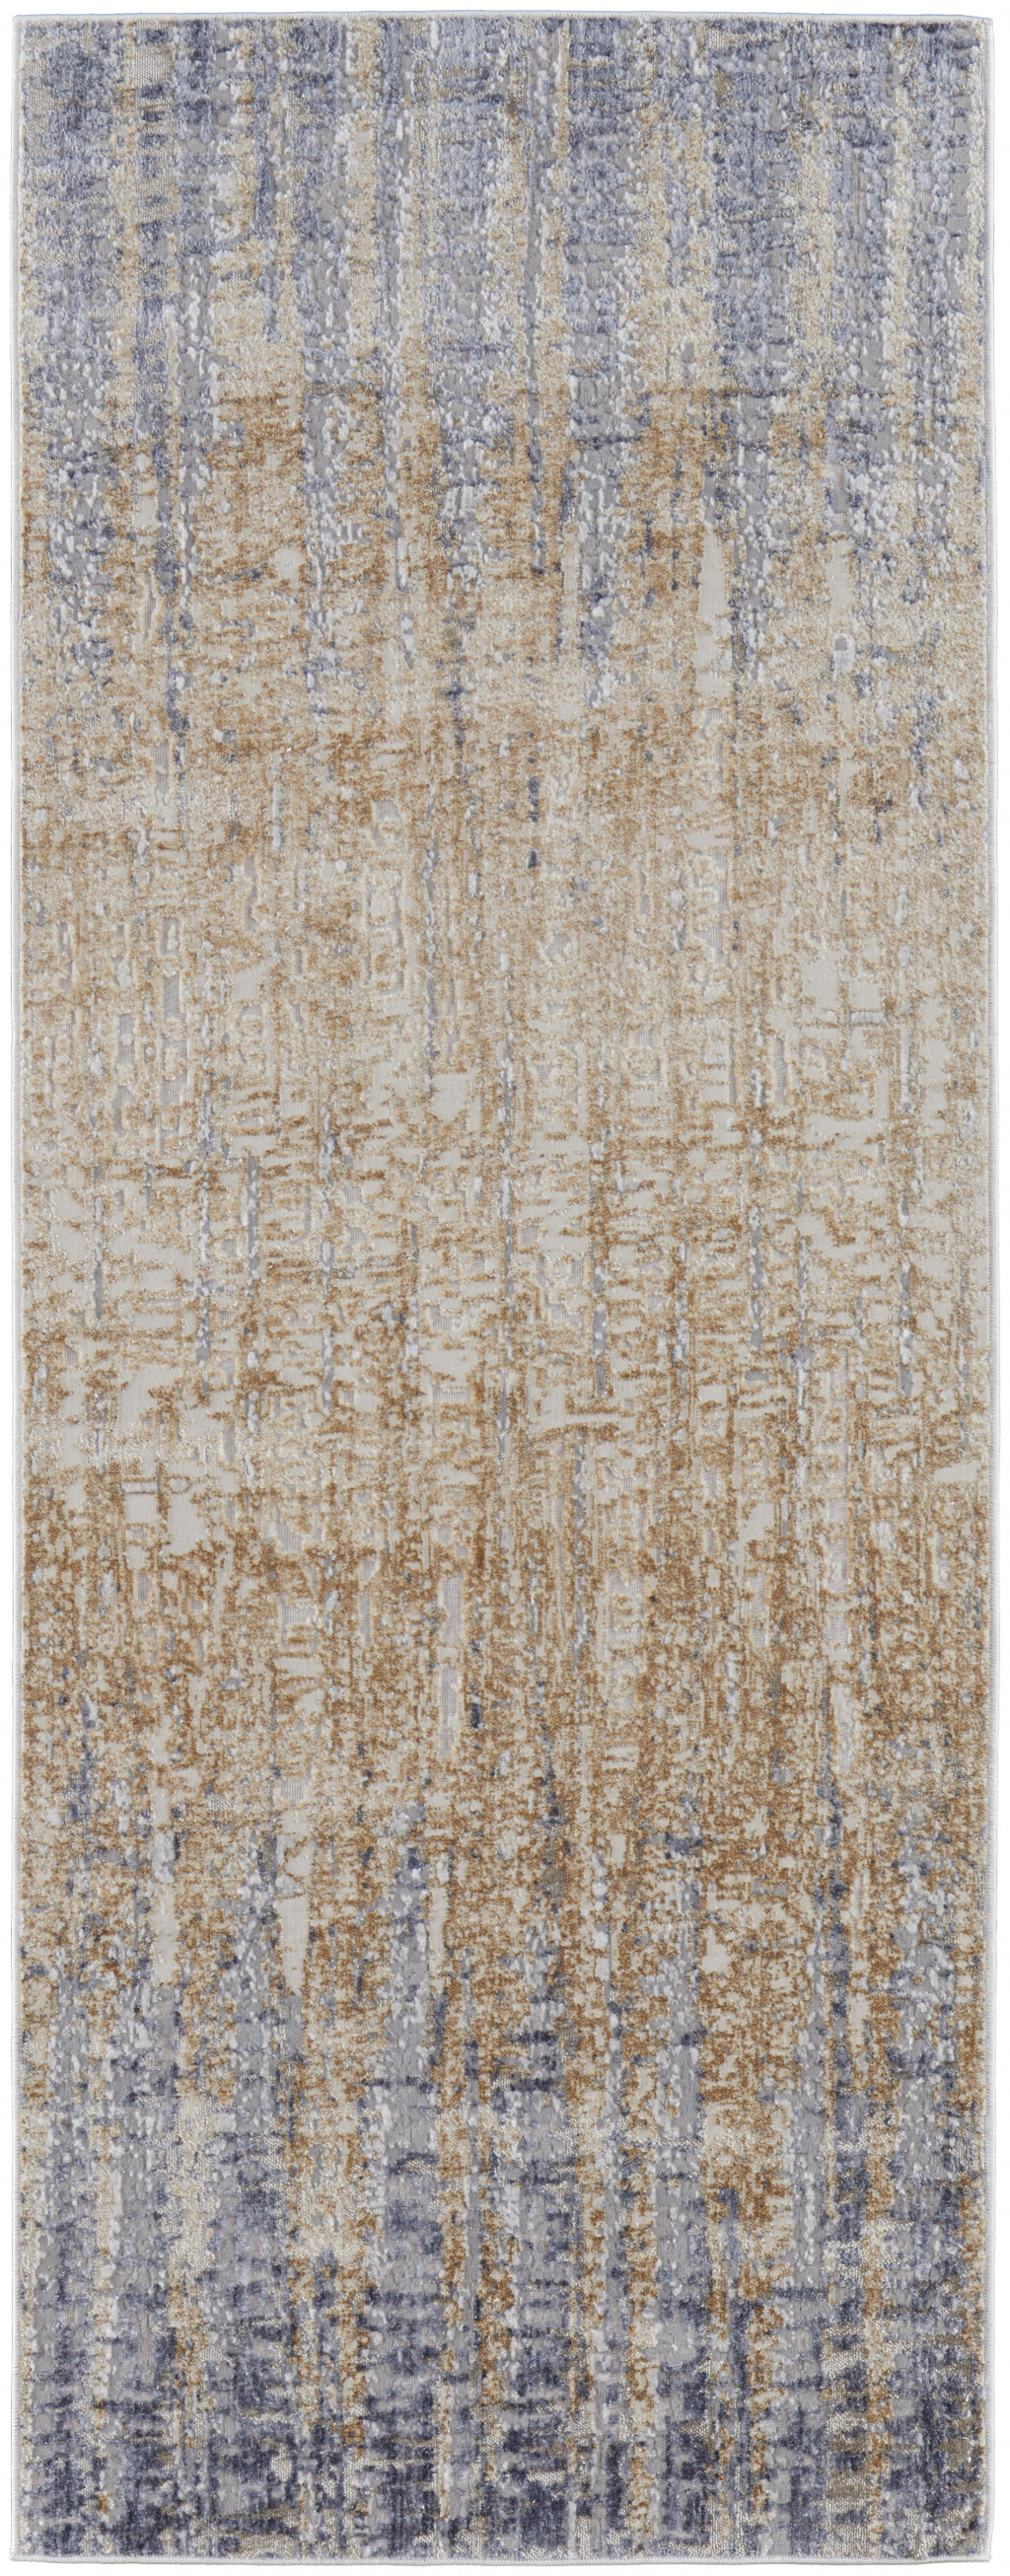 8' Tan Brown And Blue Abstract Power Loom Distressed Runner Rug-514190-1